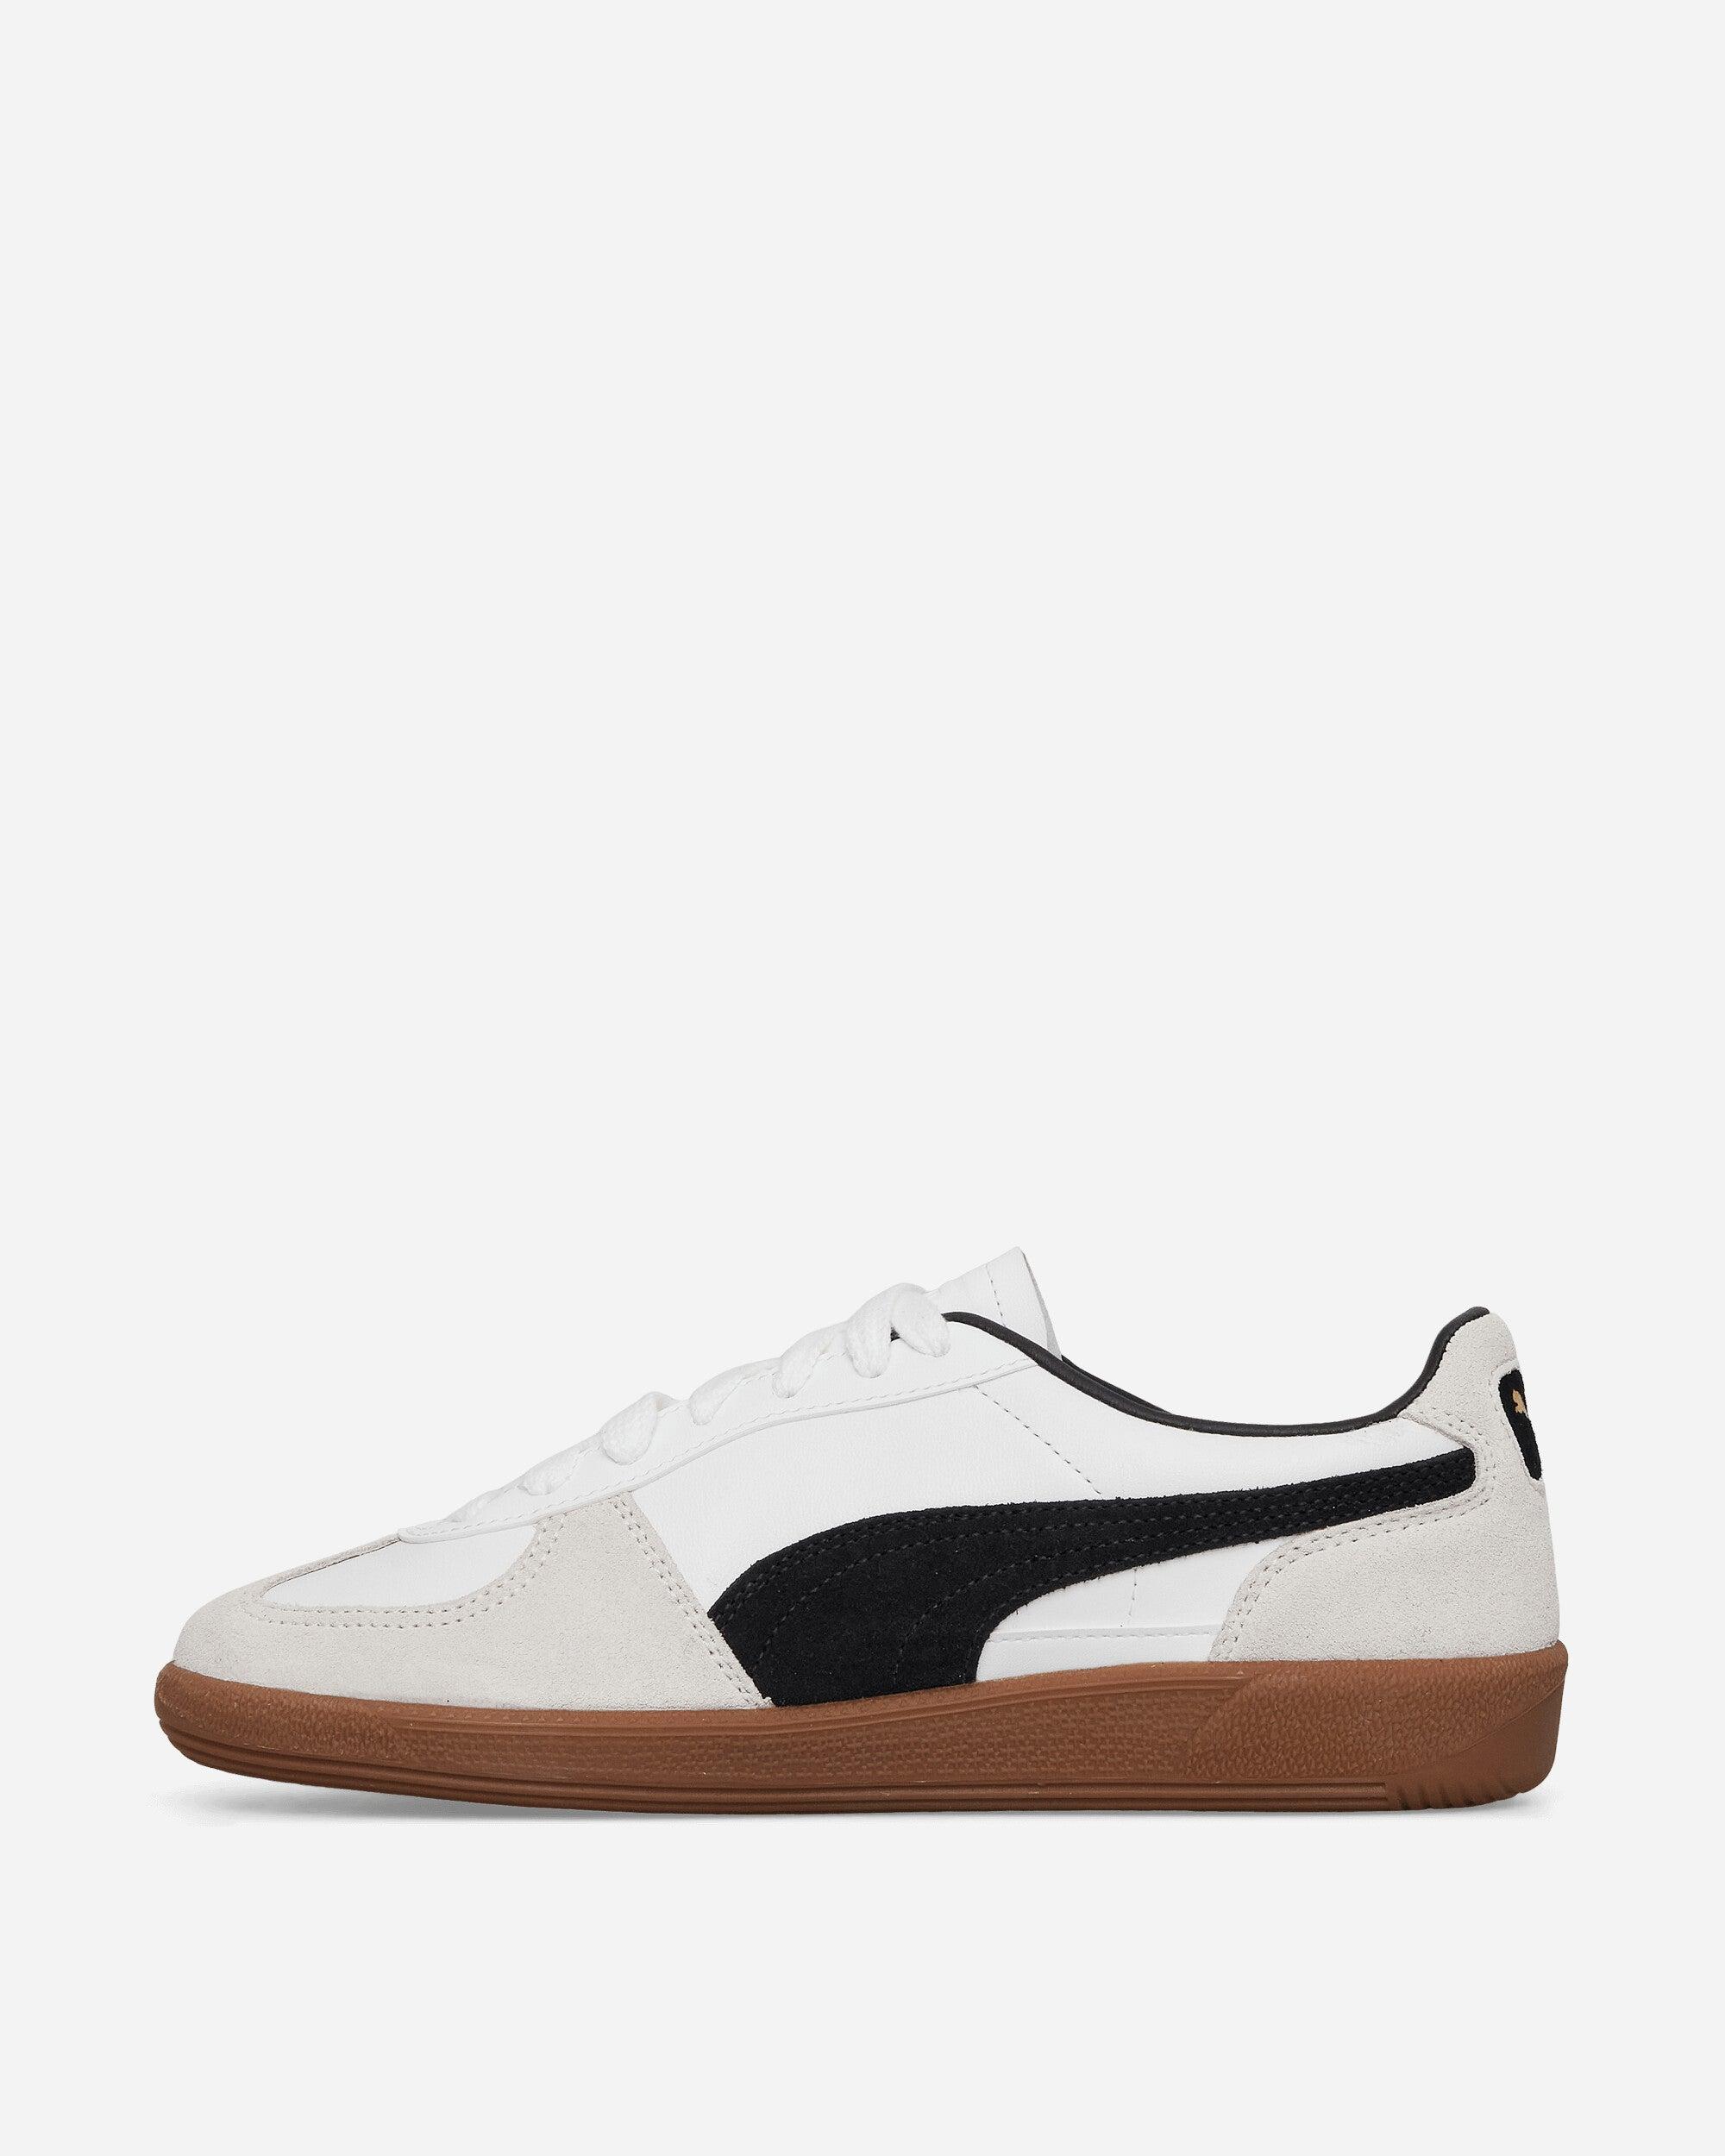 Men Sneakers / | / Palermo for Gray Lyst Vapor PUMA Gum in White Leather